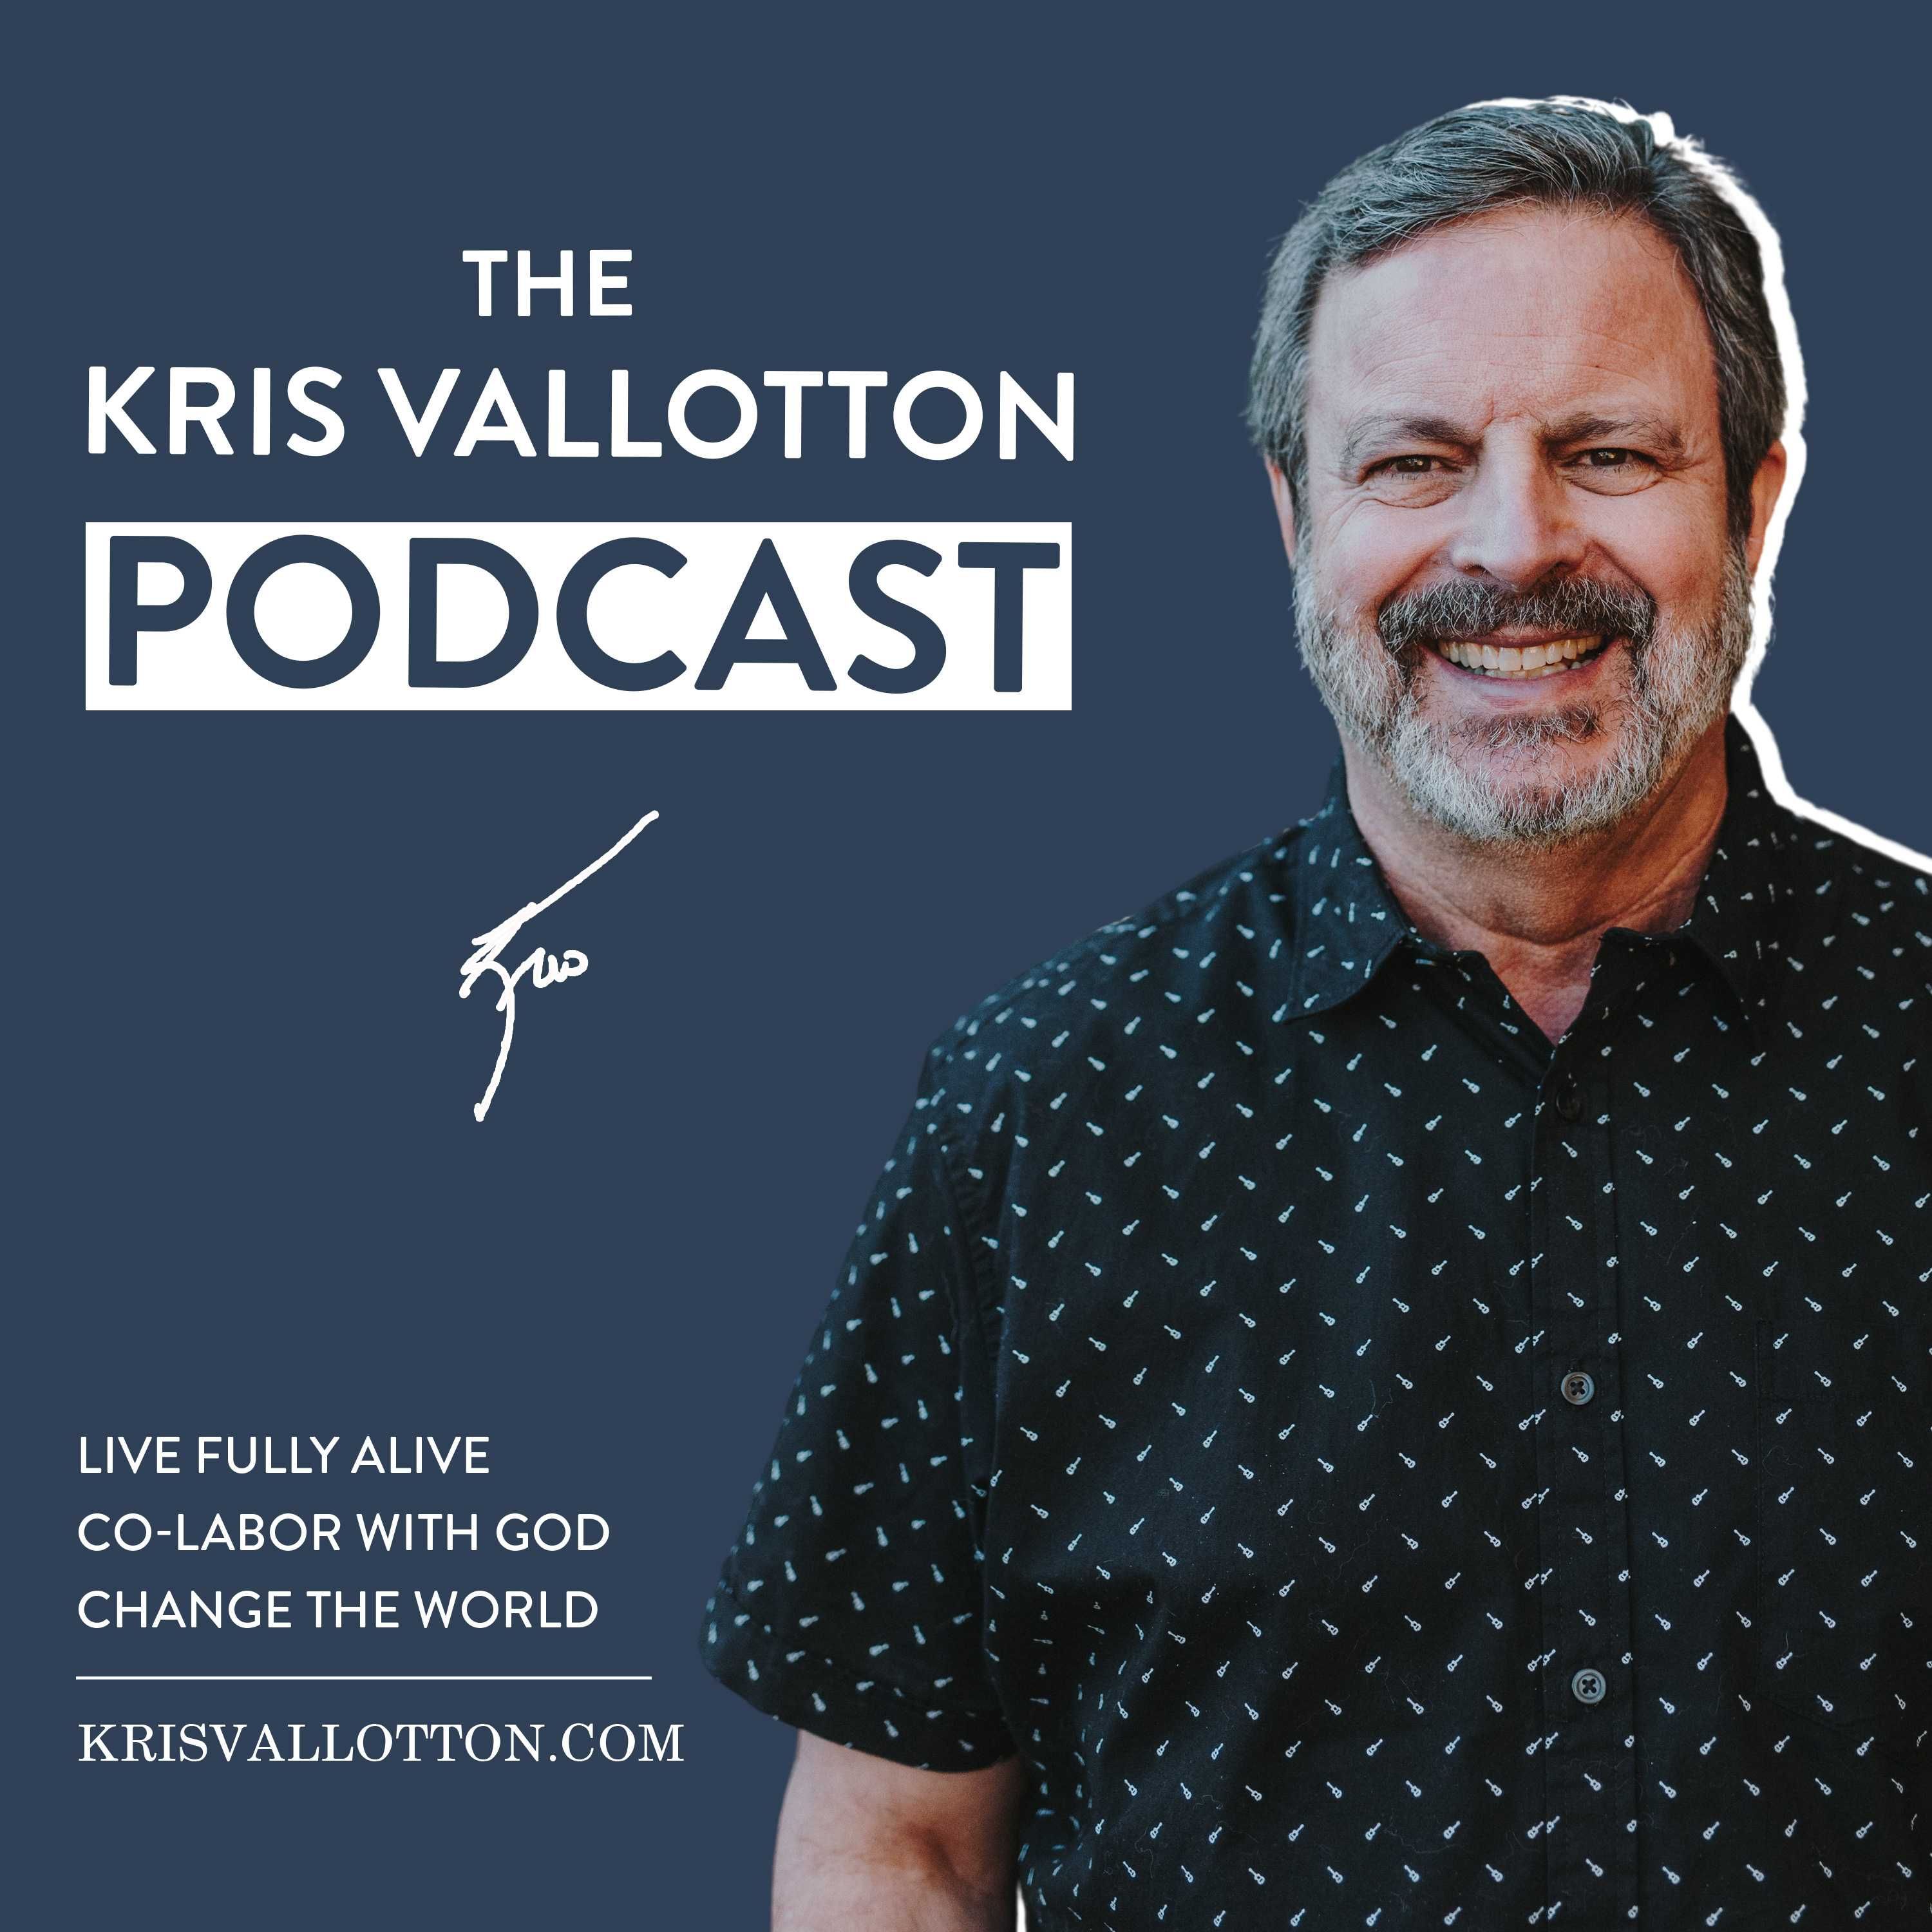 The Kris Vallotton Podcast podcast show image